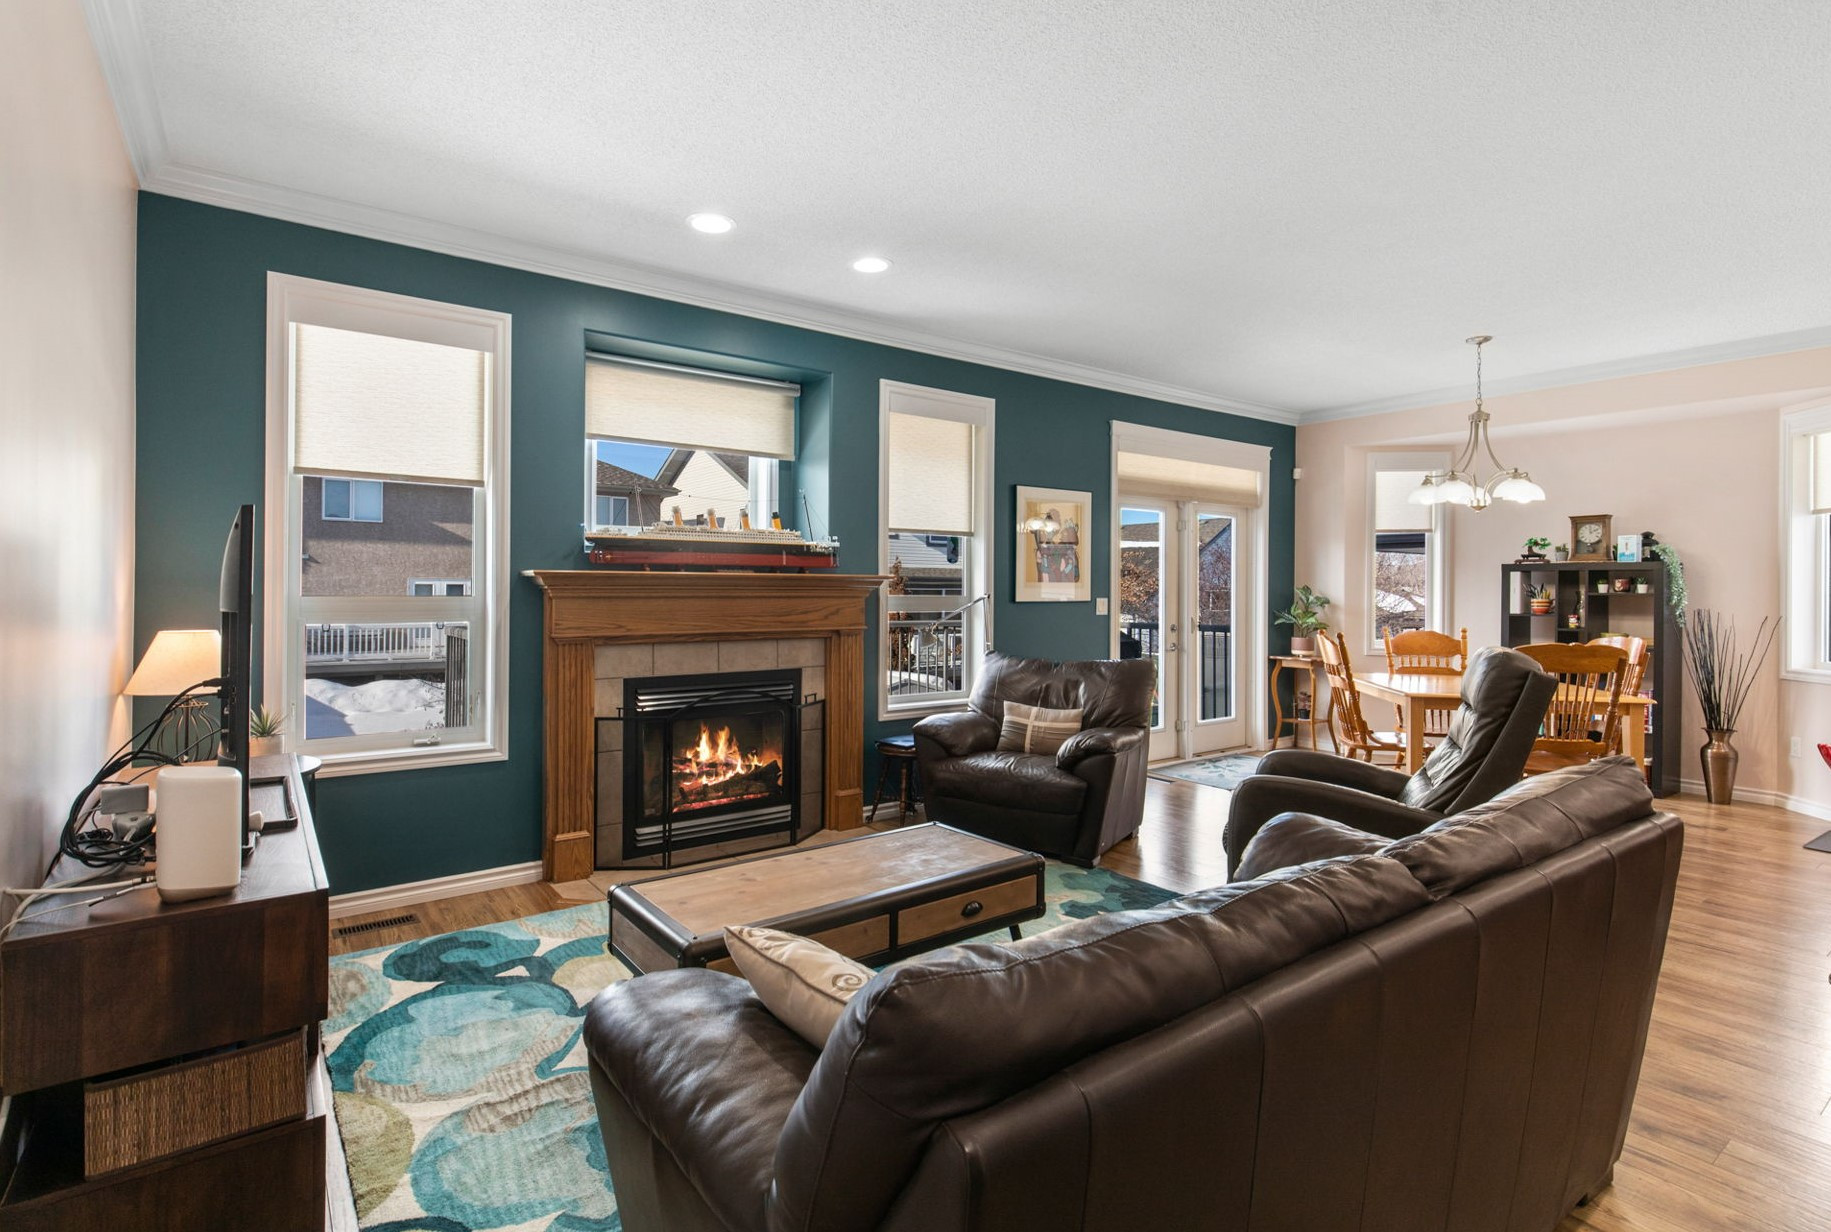 Beautiful living area with a complimenting accent wall with a beautiful wooden fireplace.